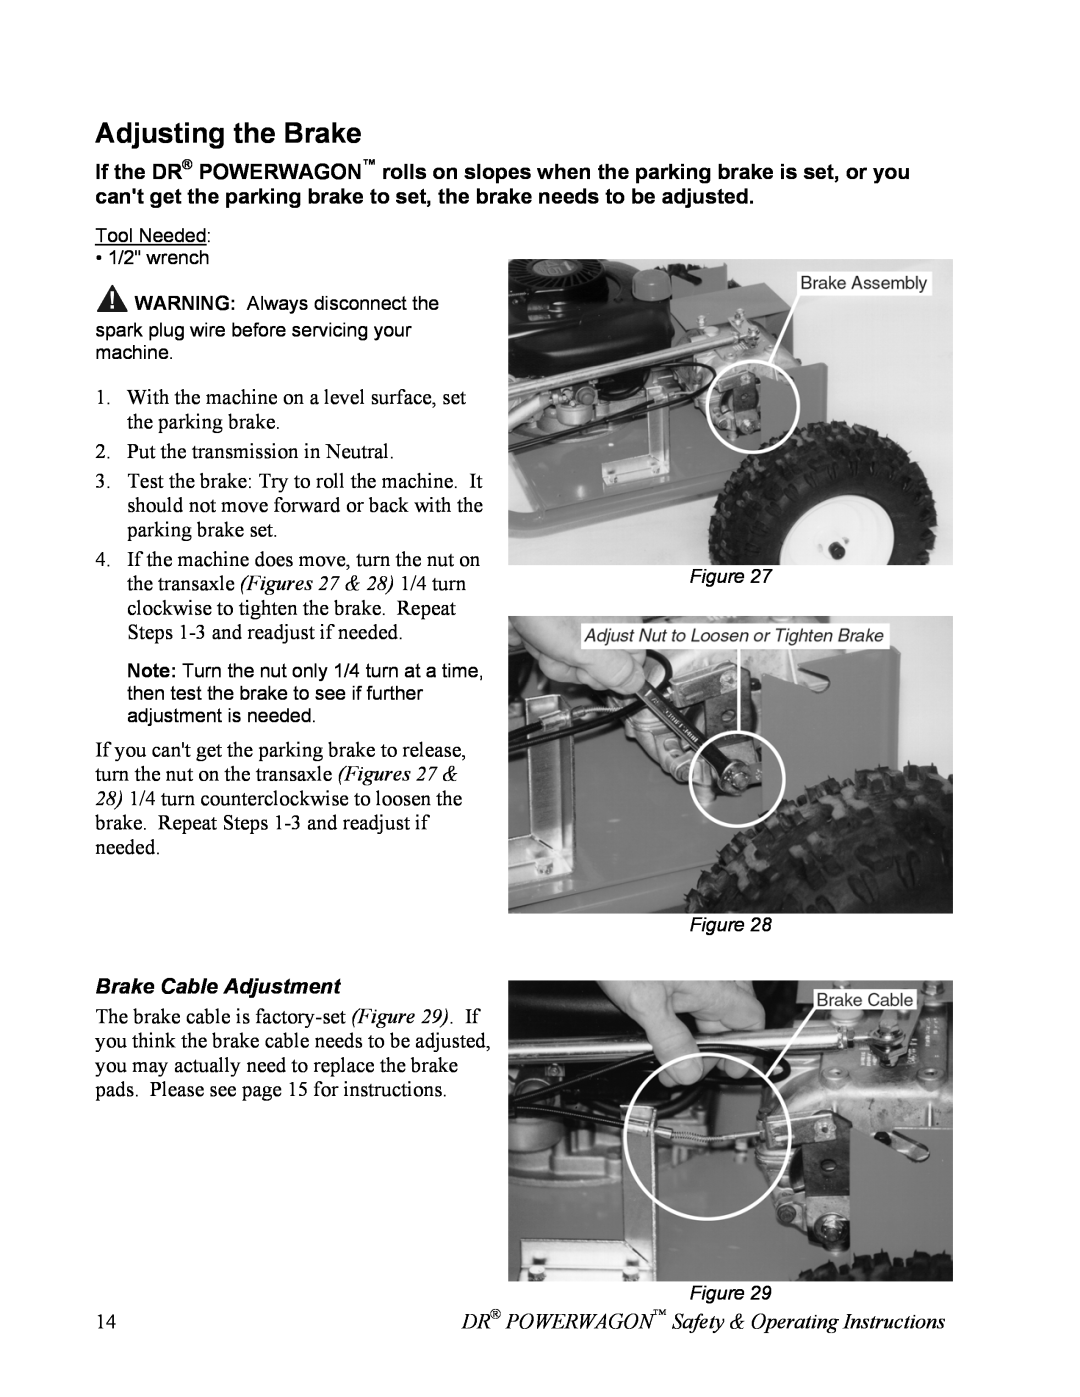 Country Home Products SUBURBANTM owner manual Adjusting the Brake, Brake Cable Adjustment 